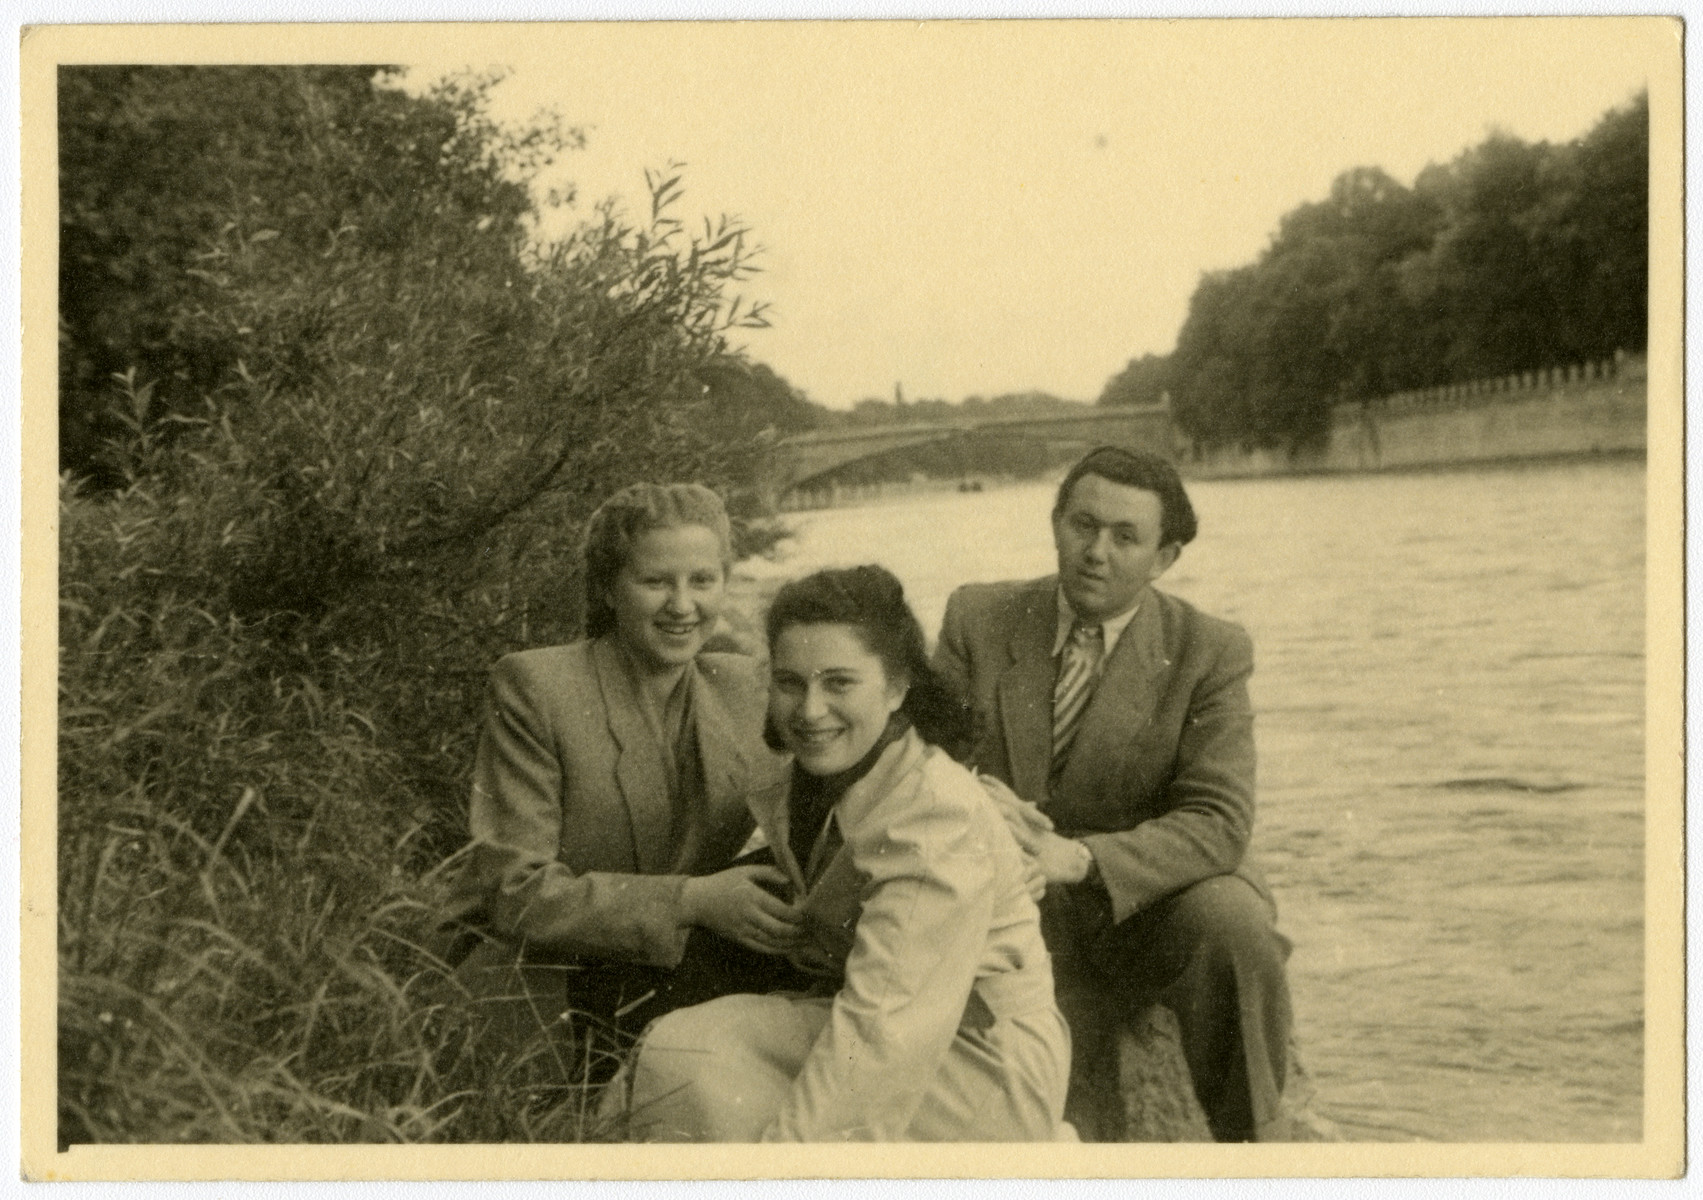 Three friends sit on the bank of the Starnberger Sea in the Feldafing displaced persons camp.

Pictured are Luba Kerschenblat, Frieda Wilner and Yeshayahu Zycer.